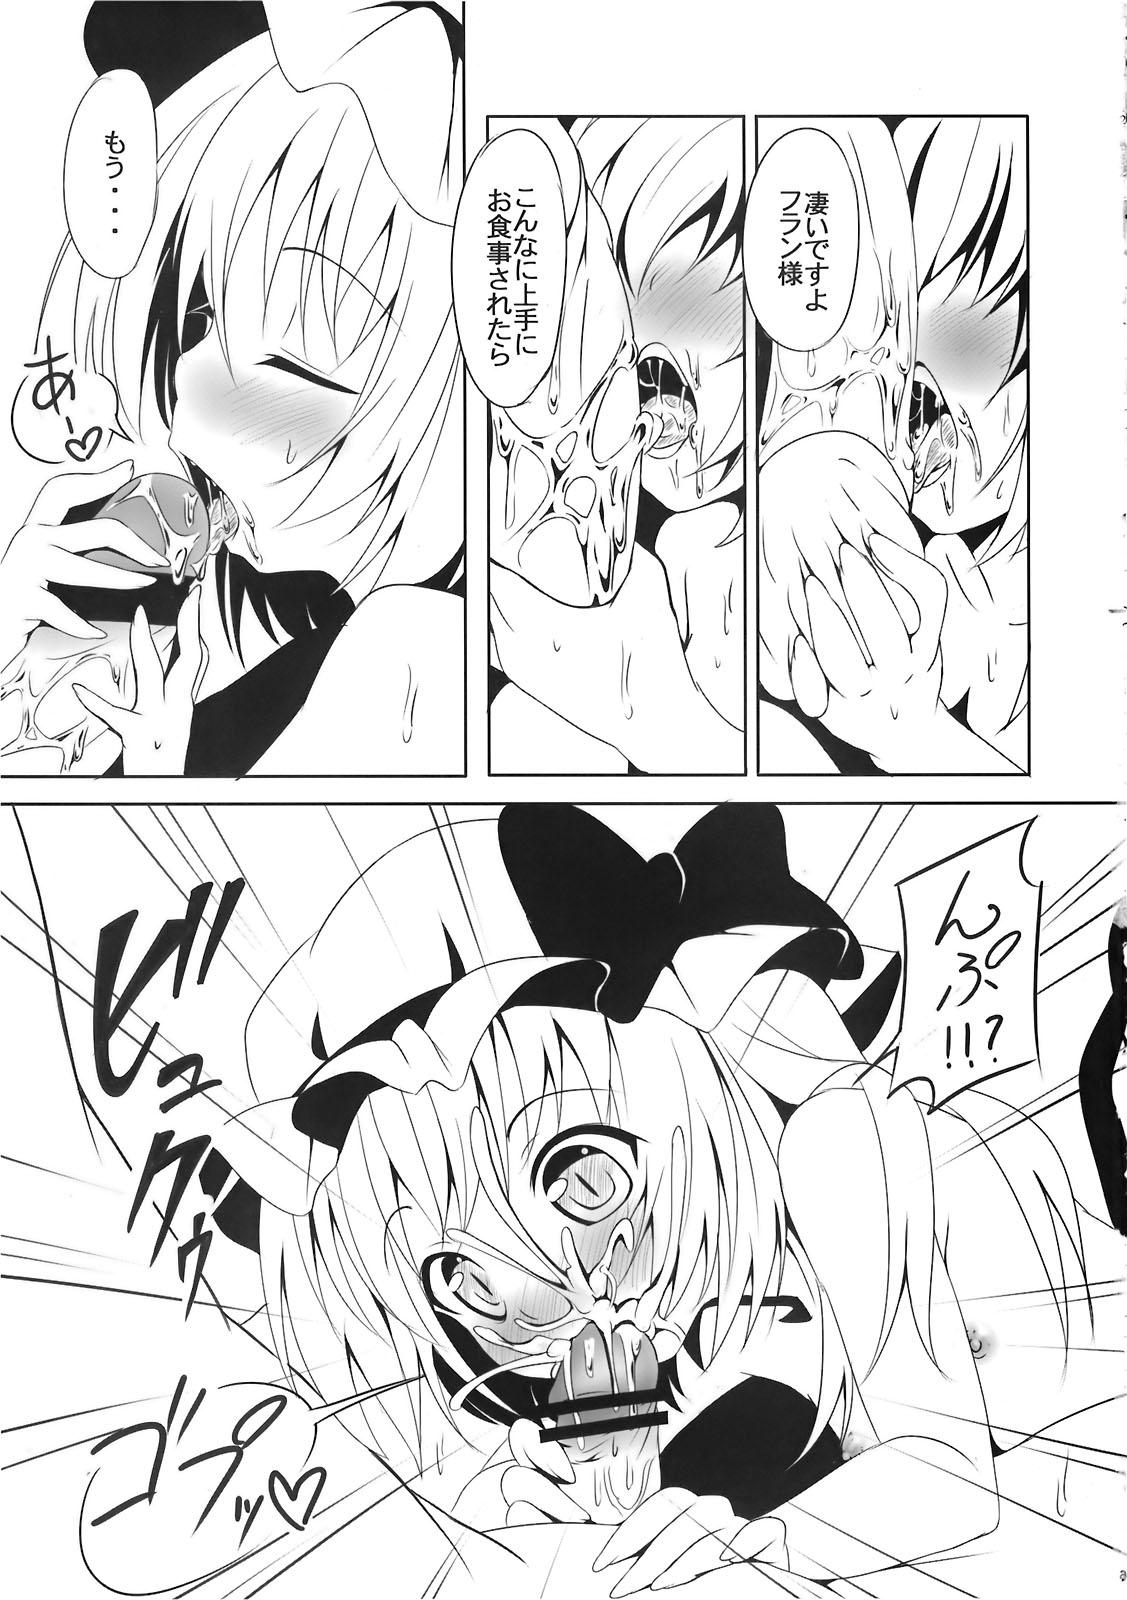 Transexual franfran - Touhou project Nice - Page 7